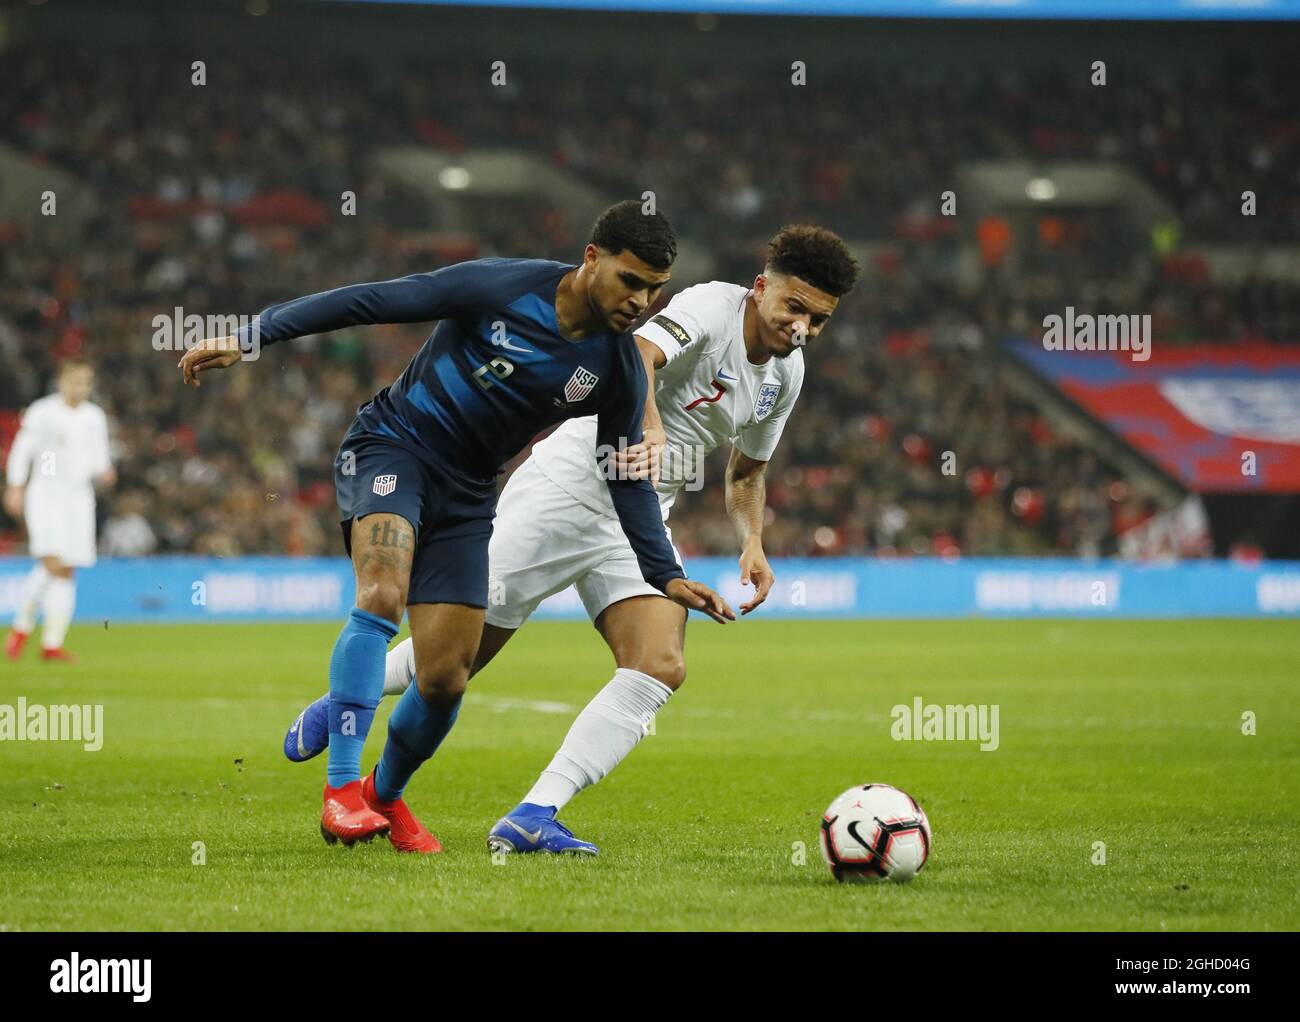 DeAndre Yedlin of USA challenged by Jadon Sancho of England during the Friendly International match at Wembley Stadium, London. Picture date: 15th November 2018. Picture credit should read: David Klein/Sportimage via PA Images Stock Photo